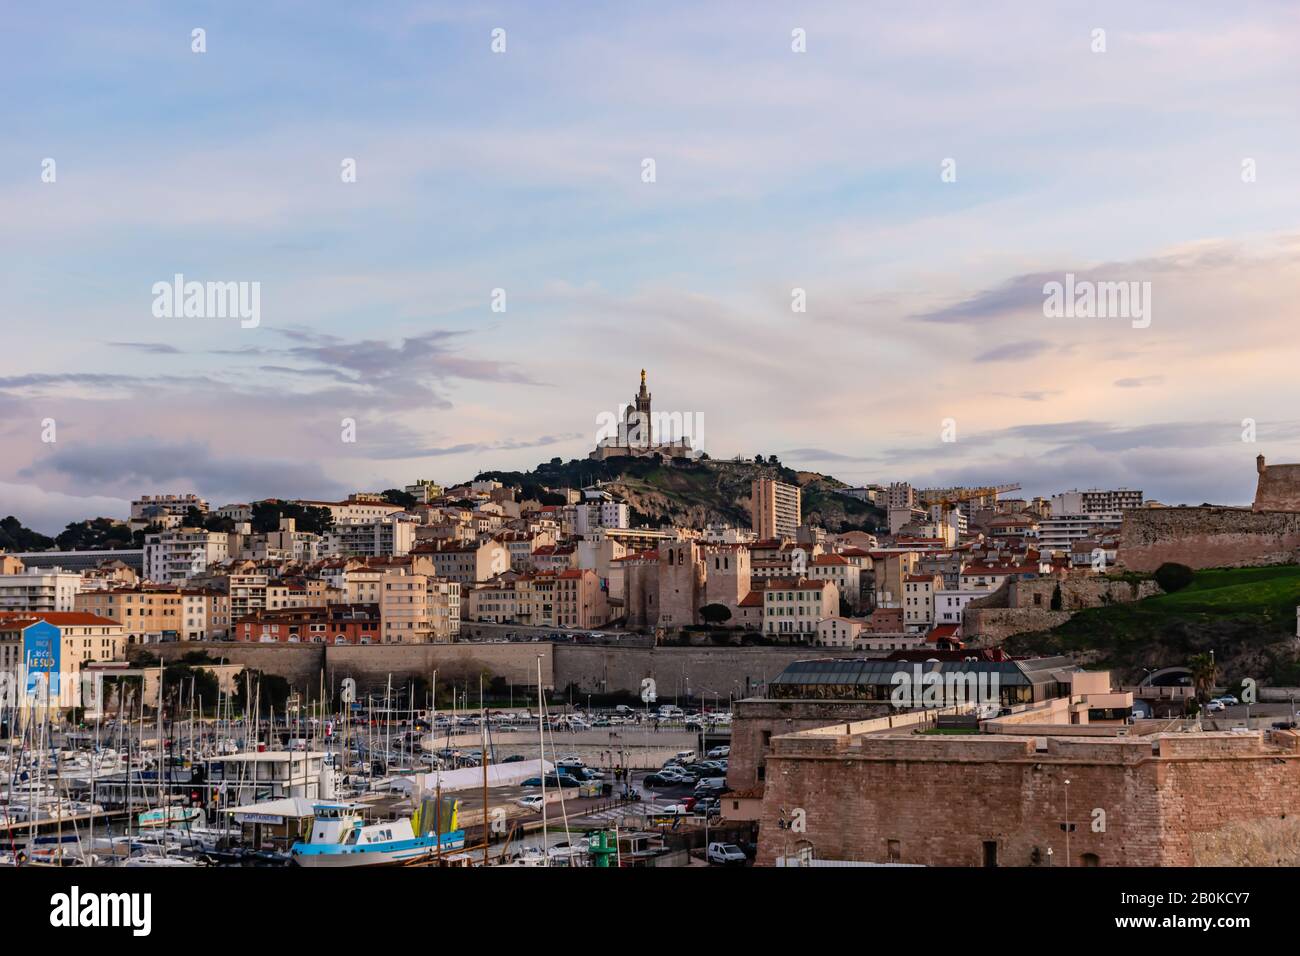 Marseille, France - January 25, 2020: the view of the Basilica Notre-Dame de la Garde and the old port at sunset Stock Photo